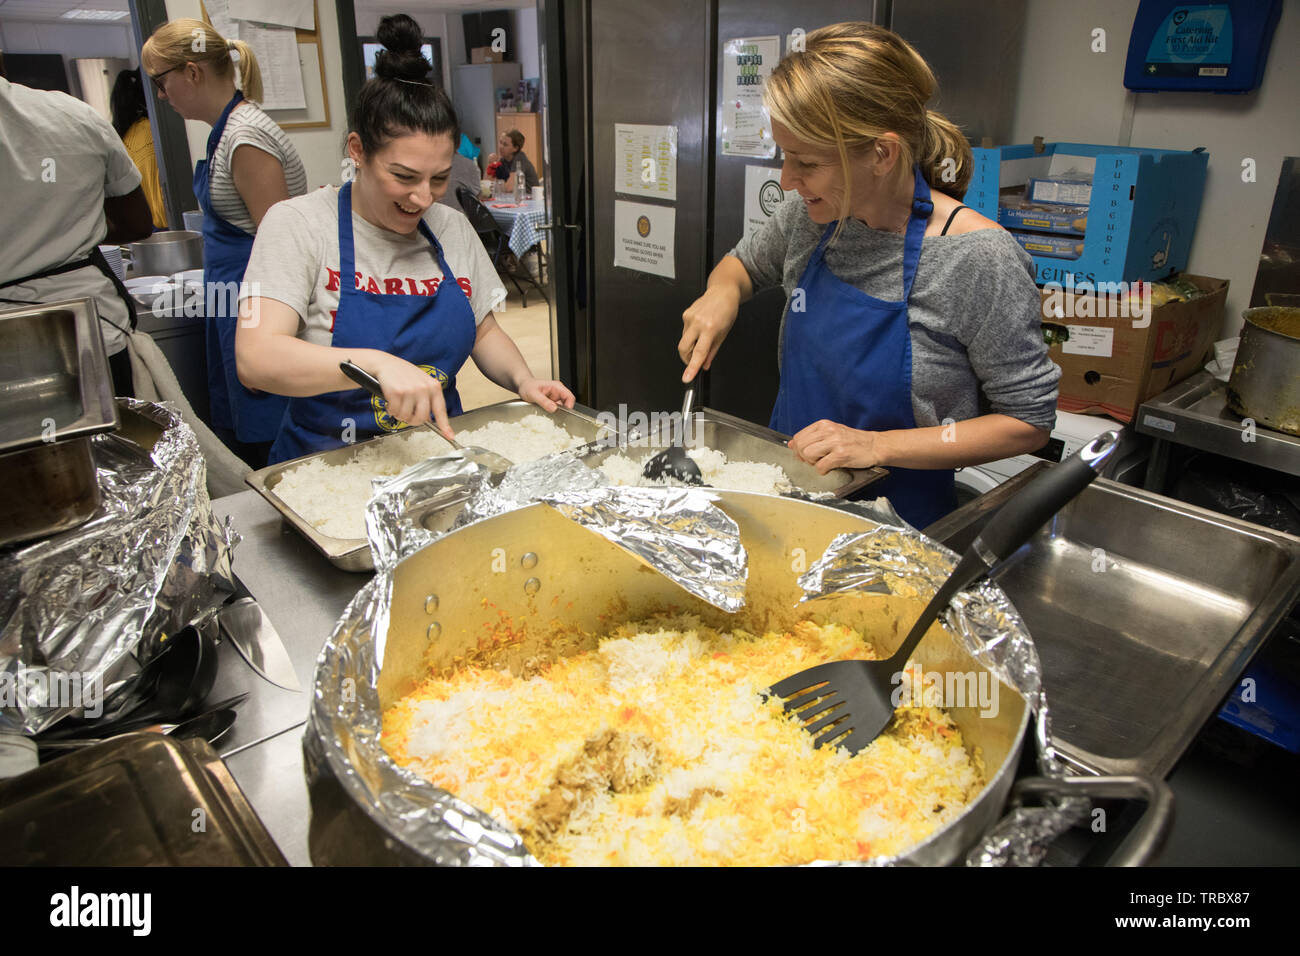 Volunteers at a community kitchen prepare a meal for diners in need. Stock Photo